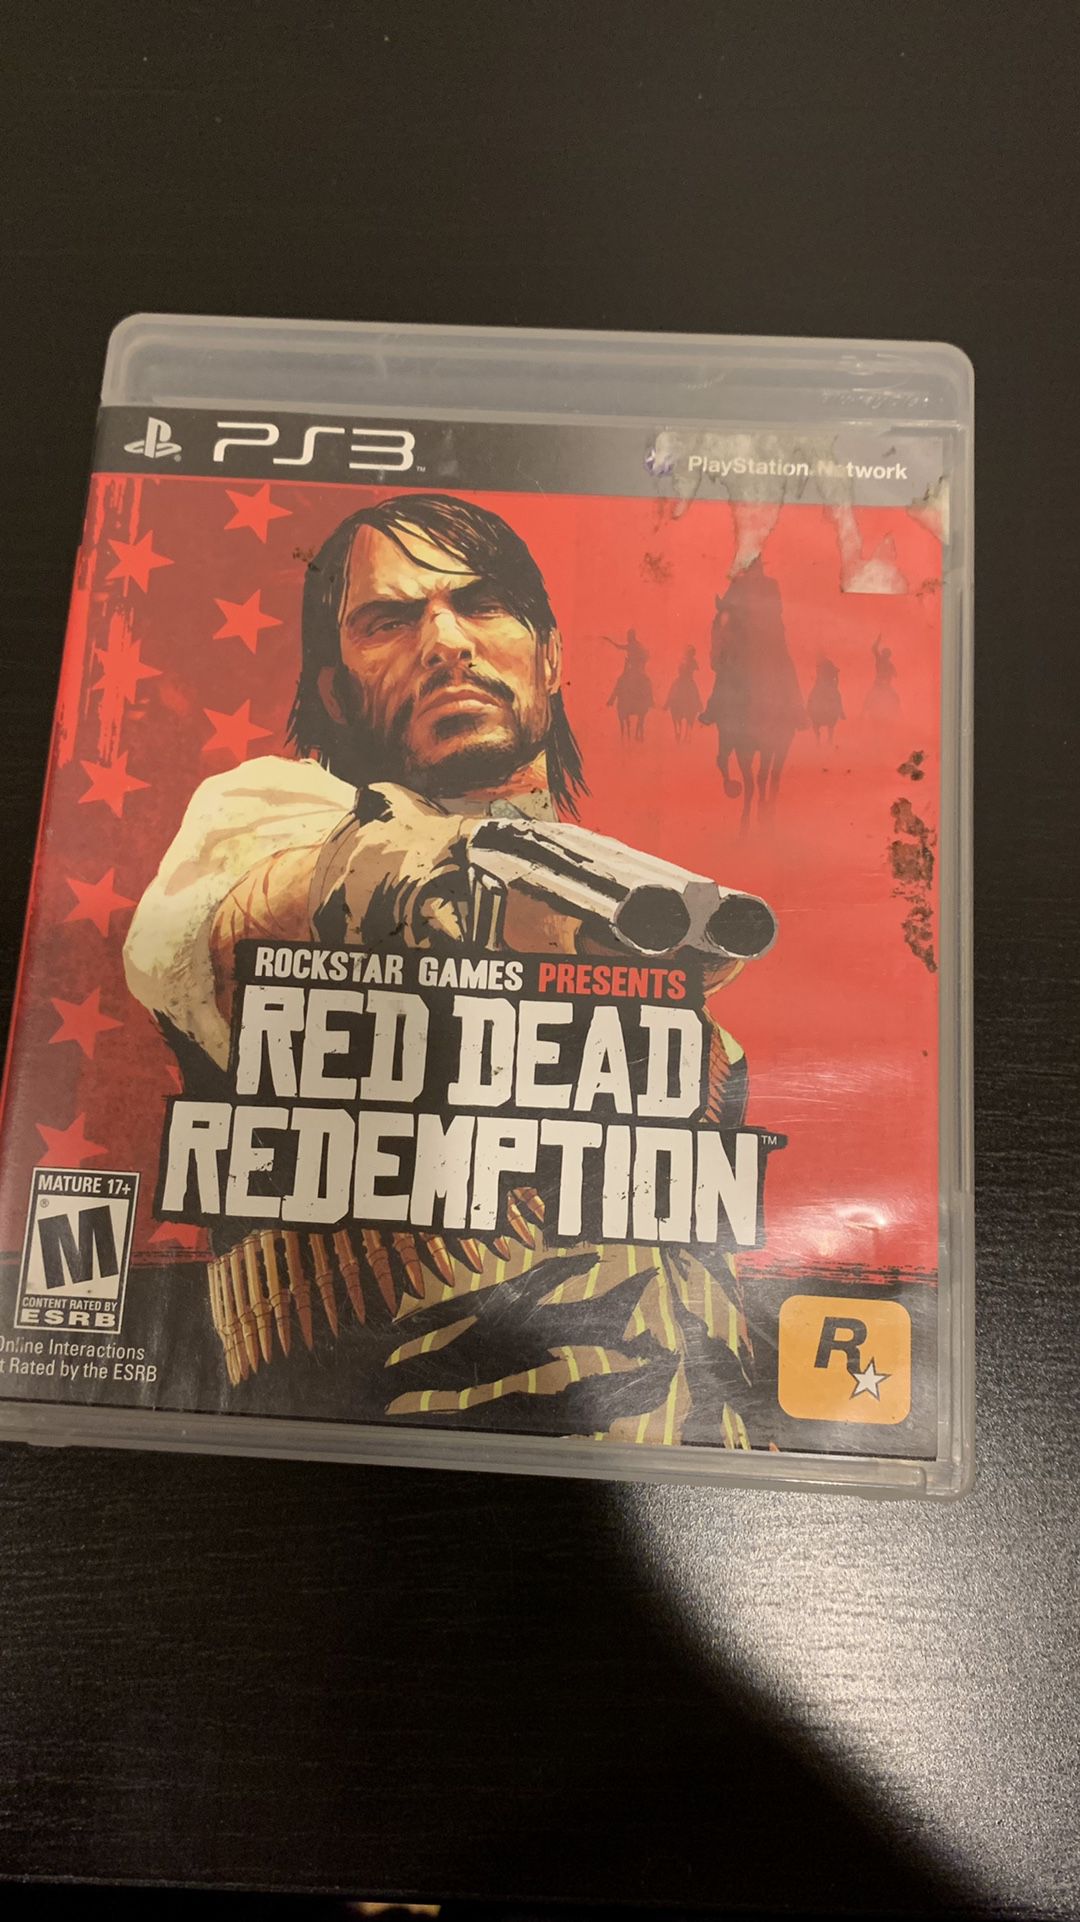 RED DEAD REDEMPTION - PS3 GAME - FOR PLAYSTATION 